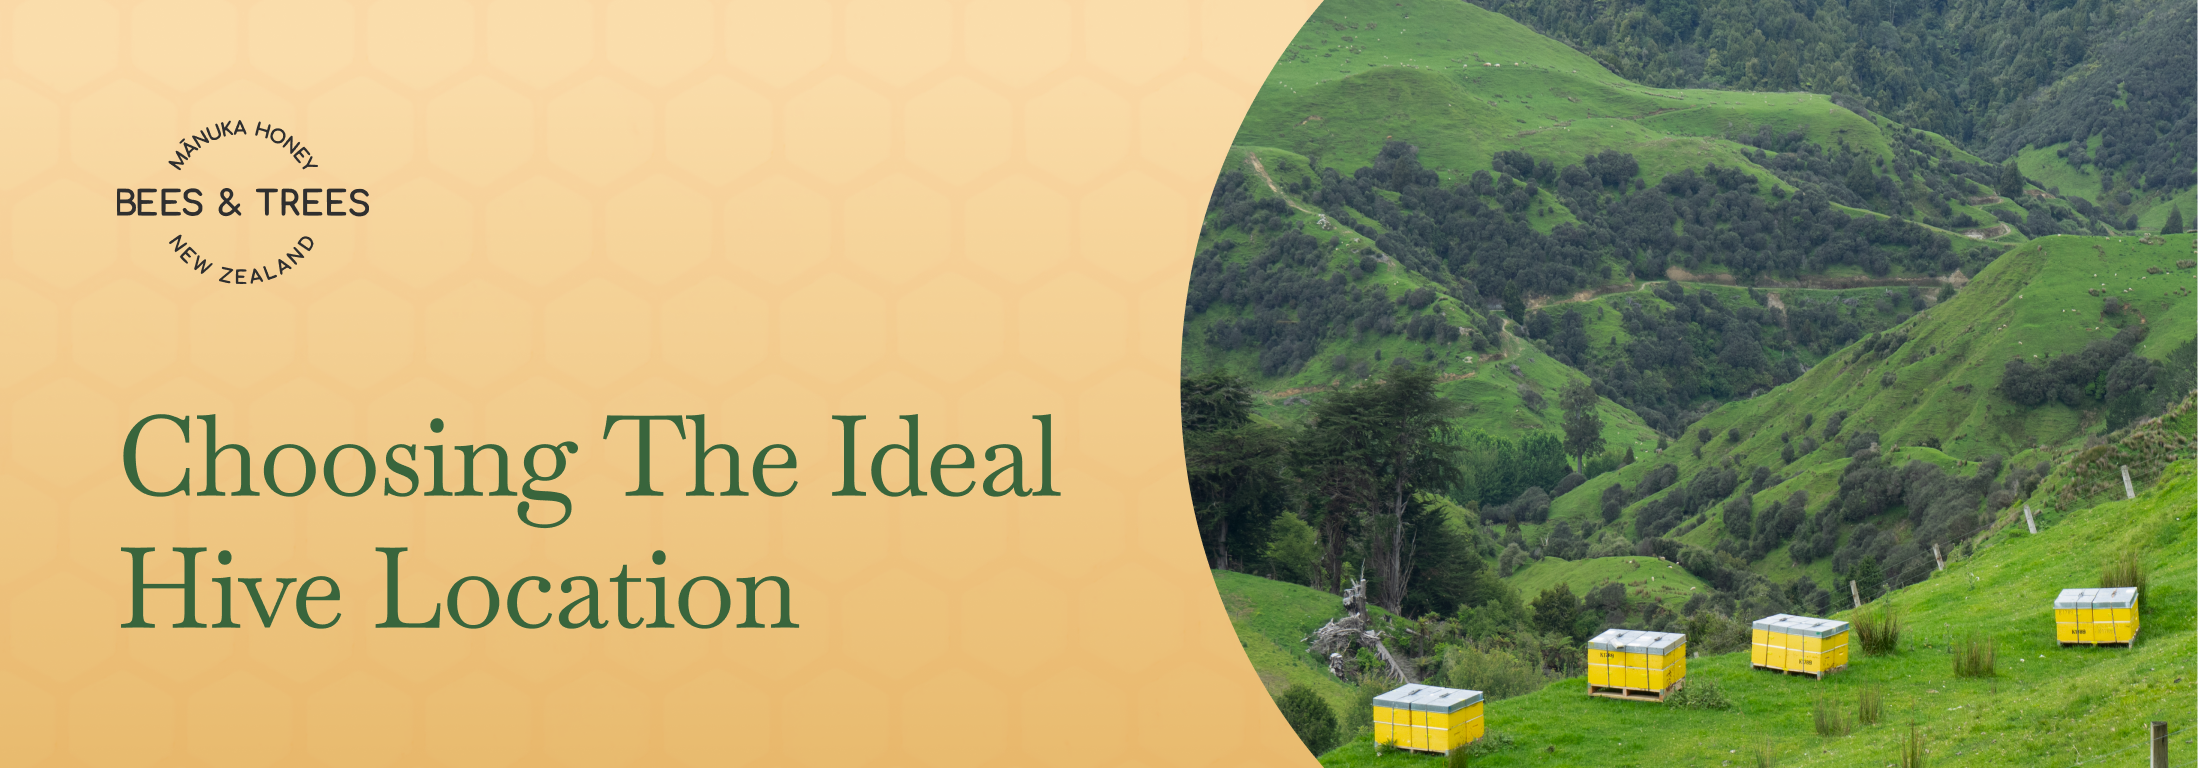 Choosing the Ideal Hive Location